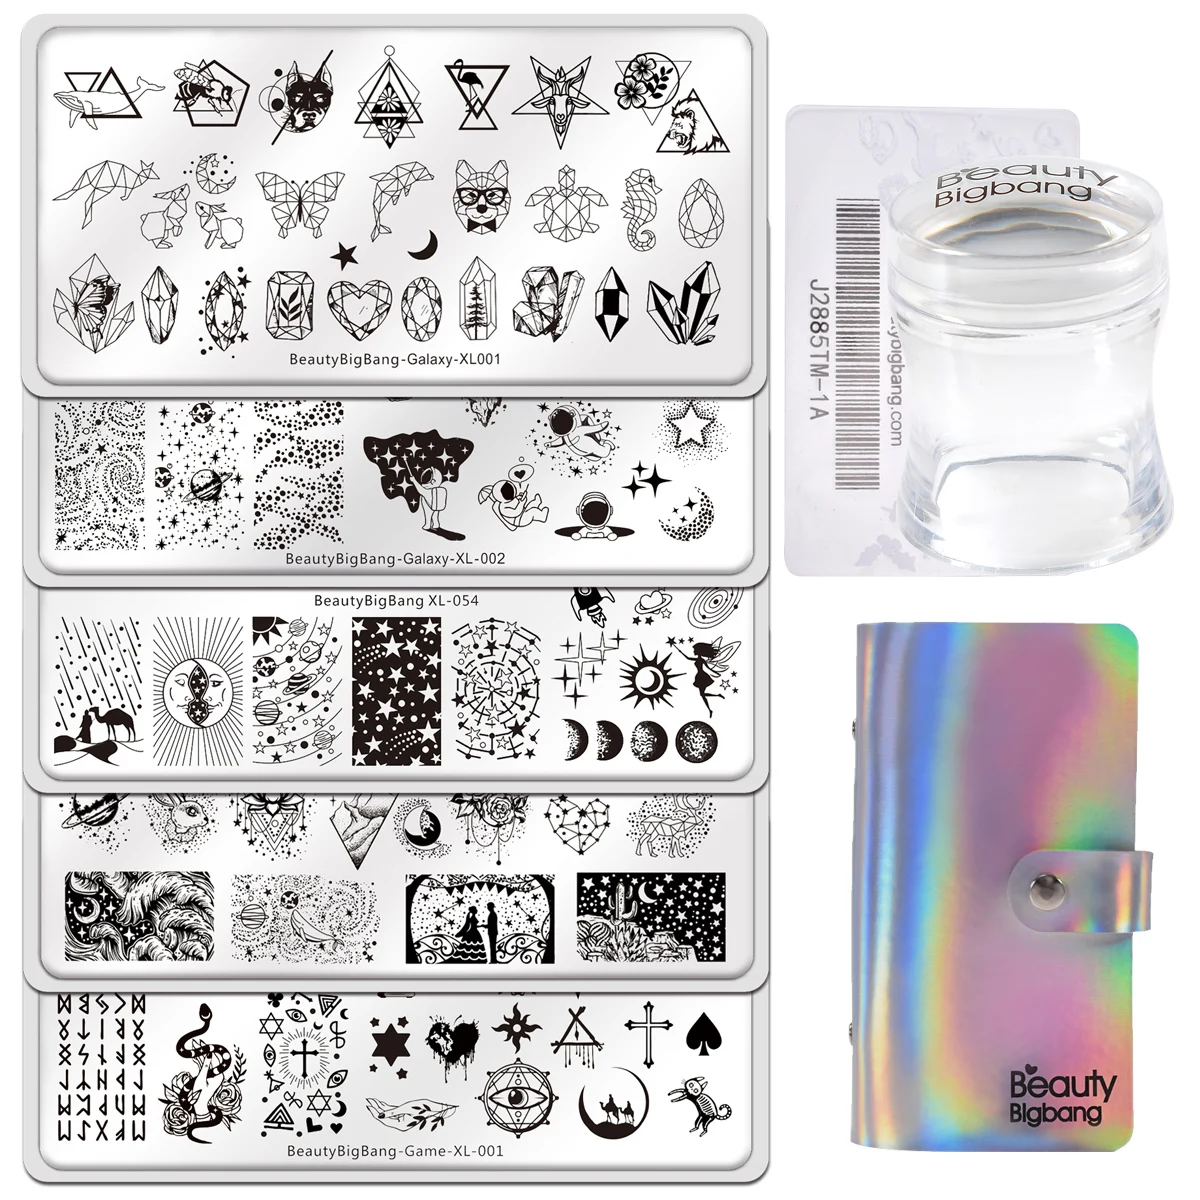 

Beautybigbang Nail Art Set 8PCS Galaxy Style Stainless Steel Star Image Stamping Plates With Storage Bag Nail Stamper Tool Sets